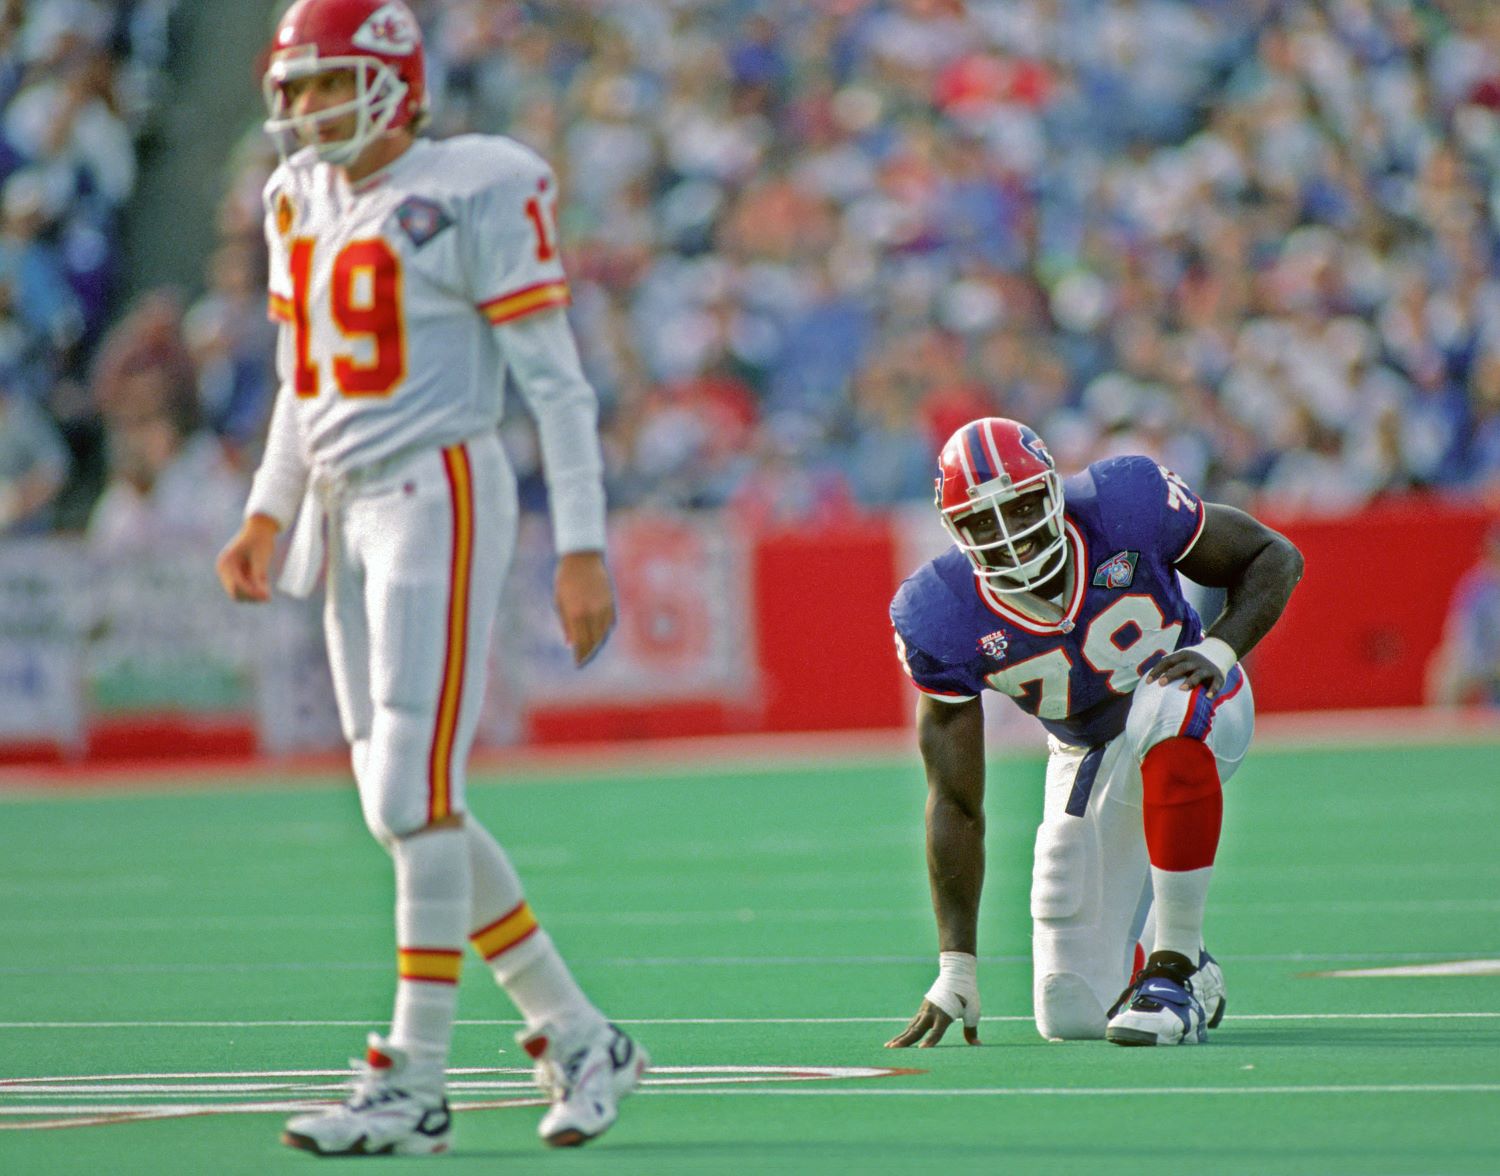 Bruce Smith has the most sacks in NFL history with 200 quarterback takedowns in 279 career games.